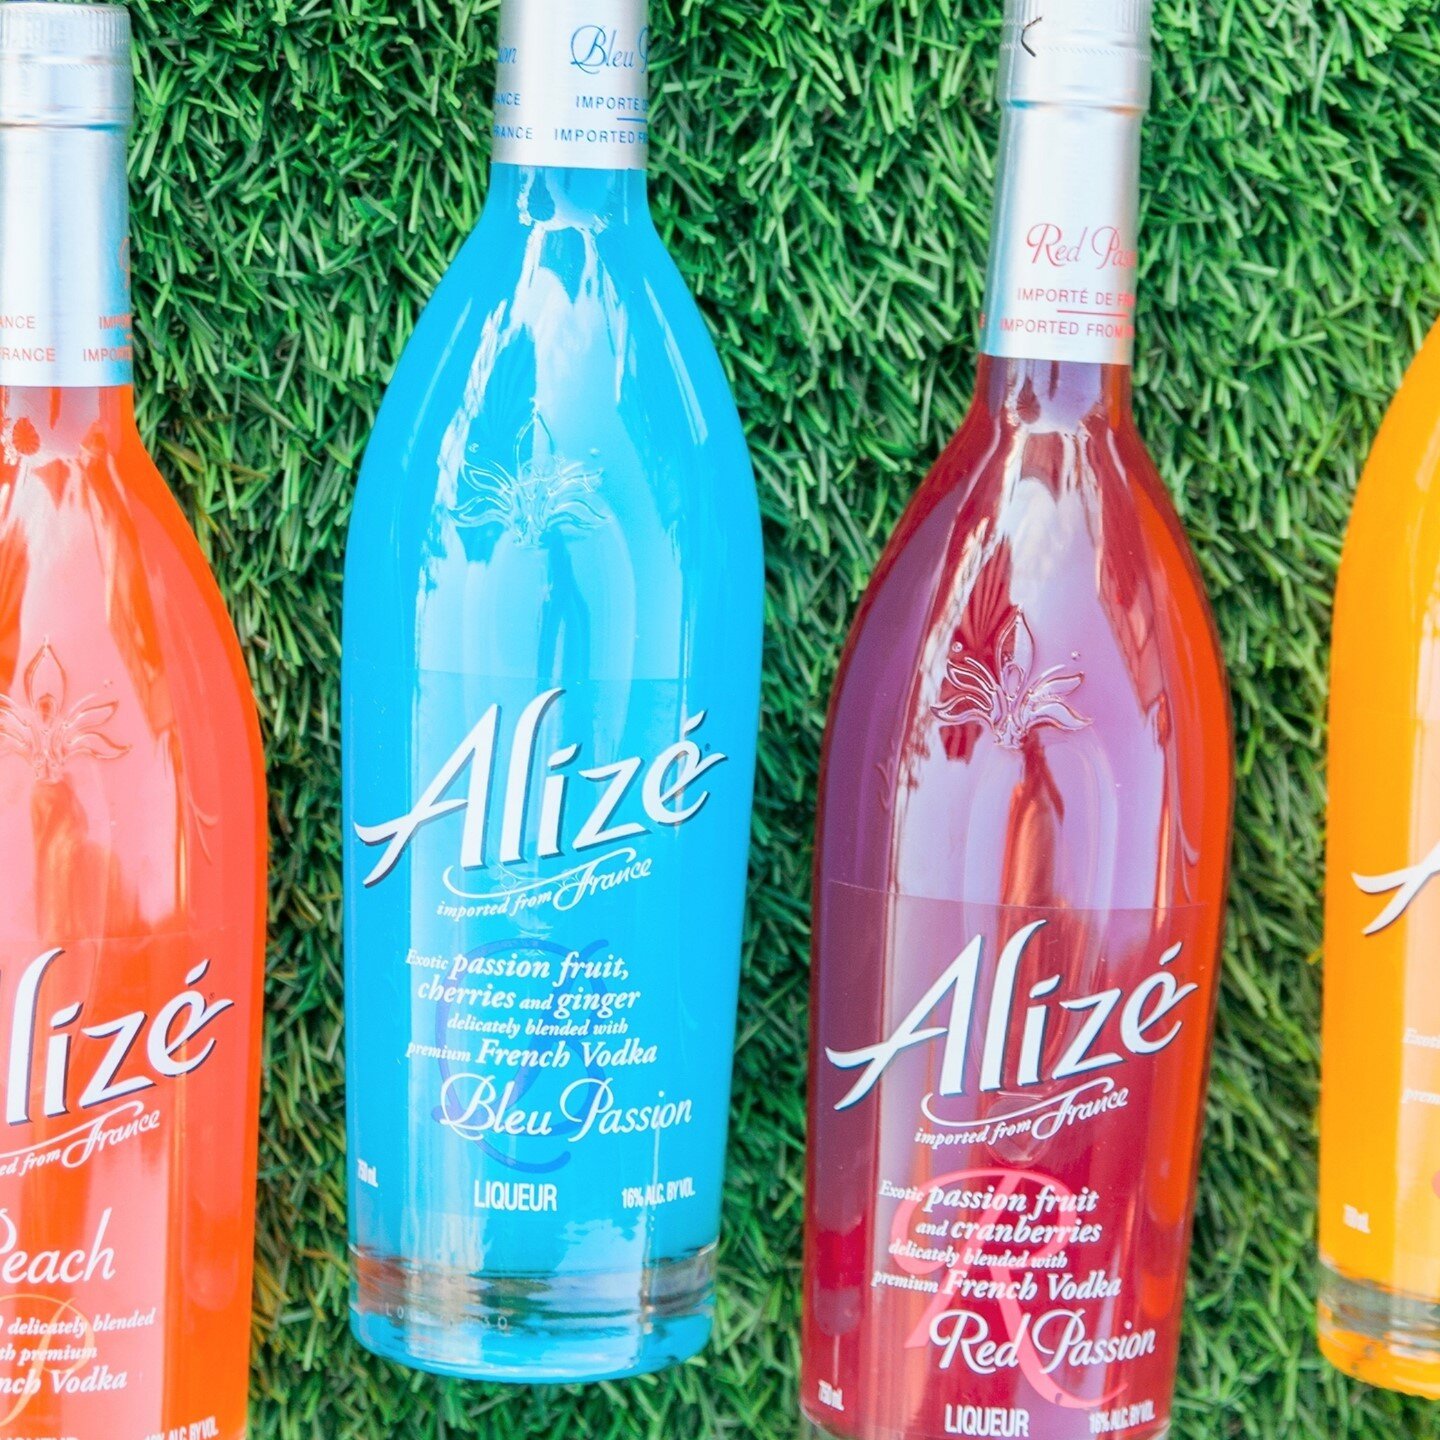 There are 14 days left in our #AlizeRainbow Contest. To enter all you have to do is snap a picture of your colorful Aliz&eacute; bottles or at a rainbow location. Tag #AlizeRainbow and post on Instagram! The contest ends on 7/11. (No purchase necessa